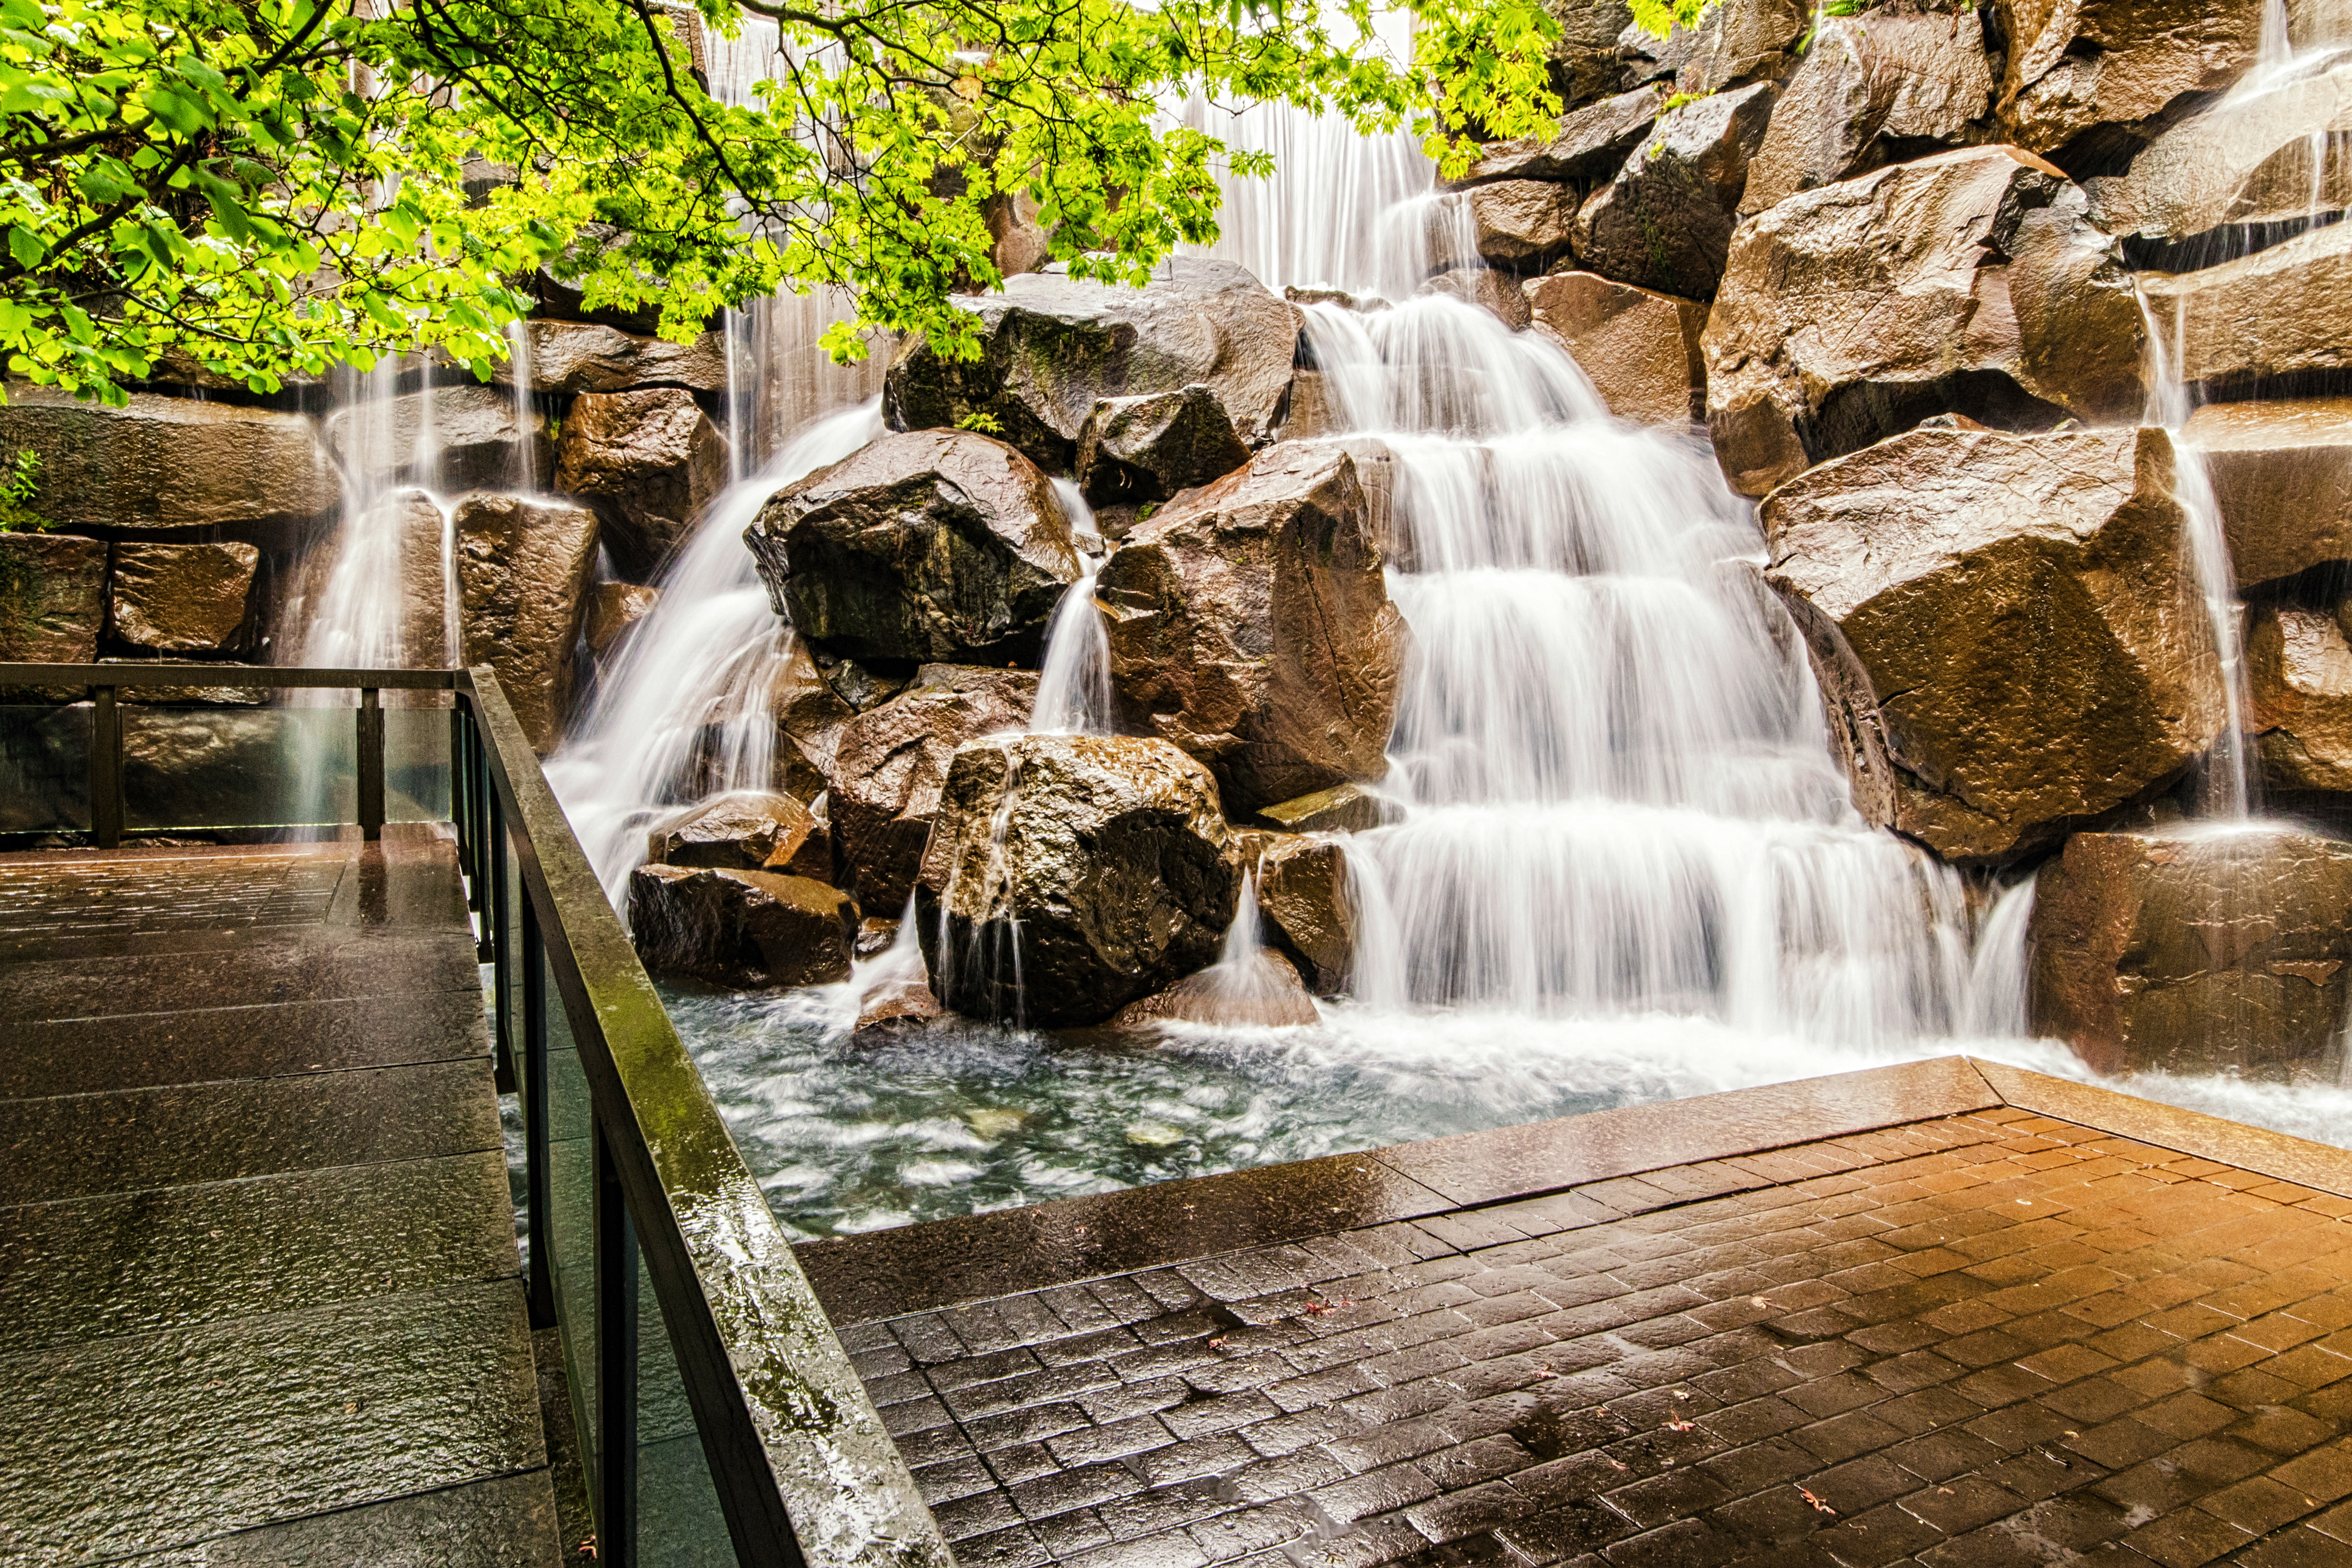 This free waterfall park in our state is so breathtaking! 